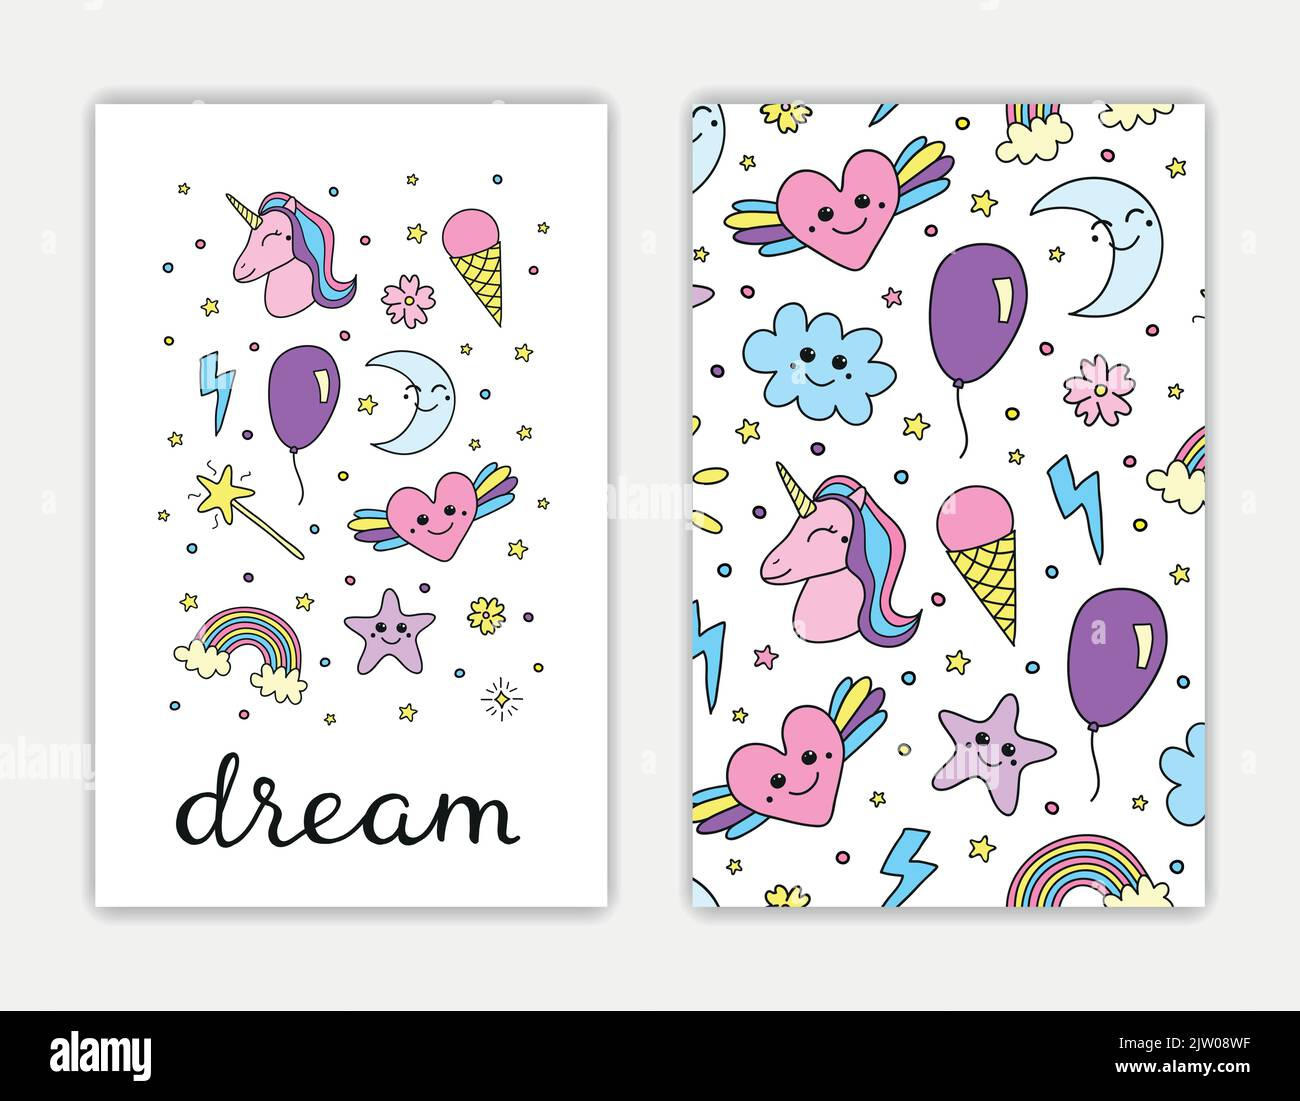 Card templates with hand drawn colored cute items and lettering. Used clipping mask. Stock Vector